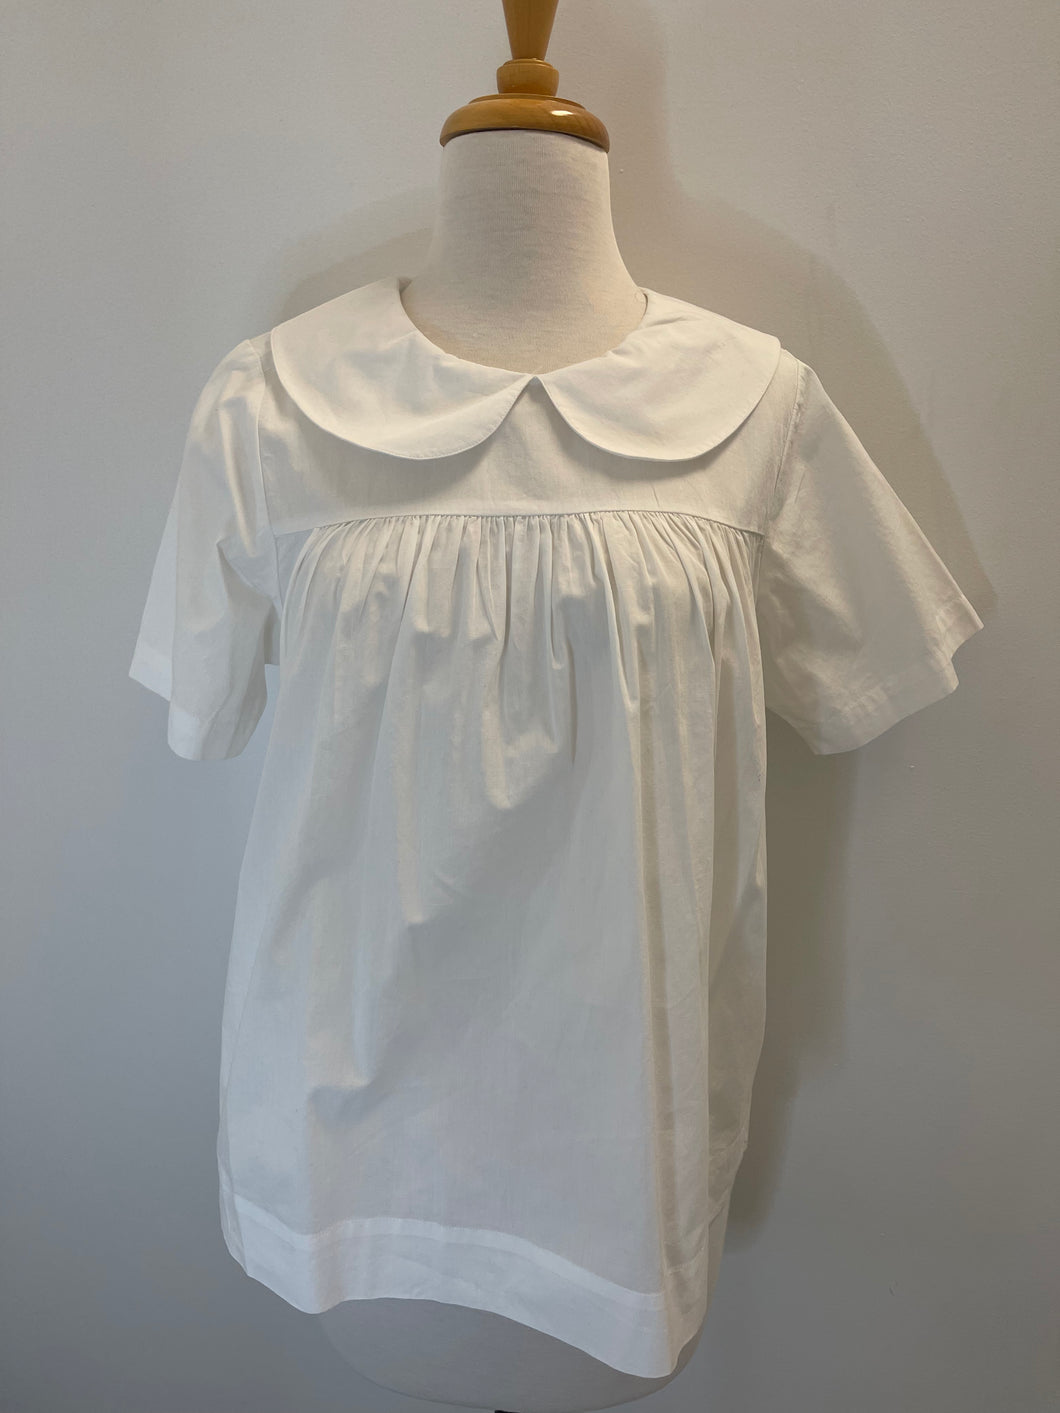 Frances Valentine - Annabelle Oversized Peter Pan Collared Top - White